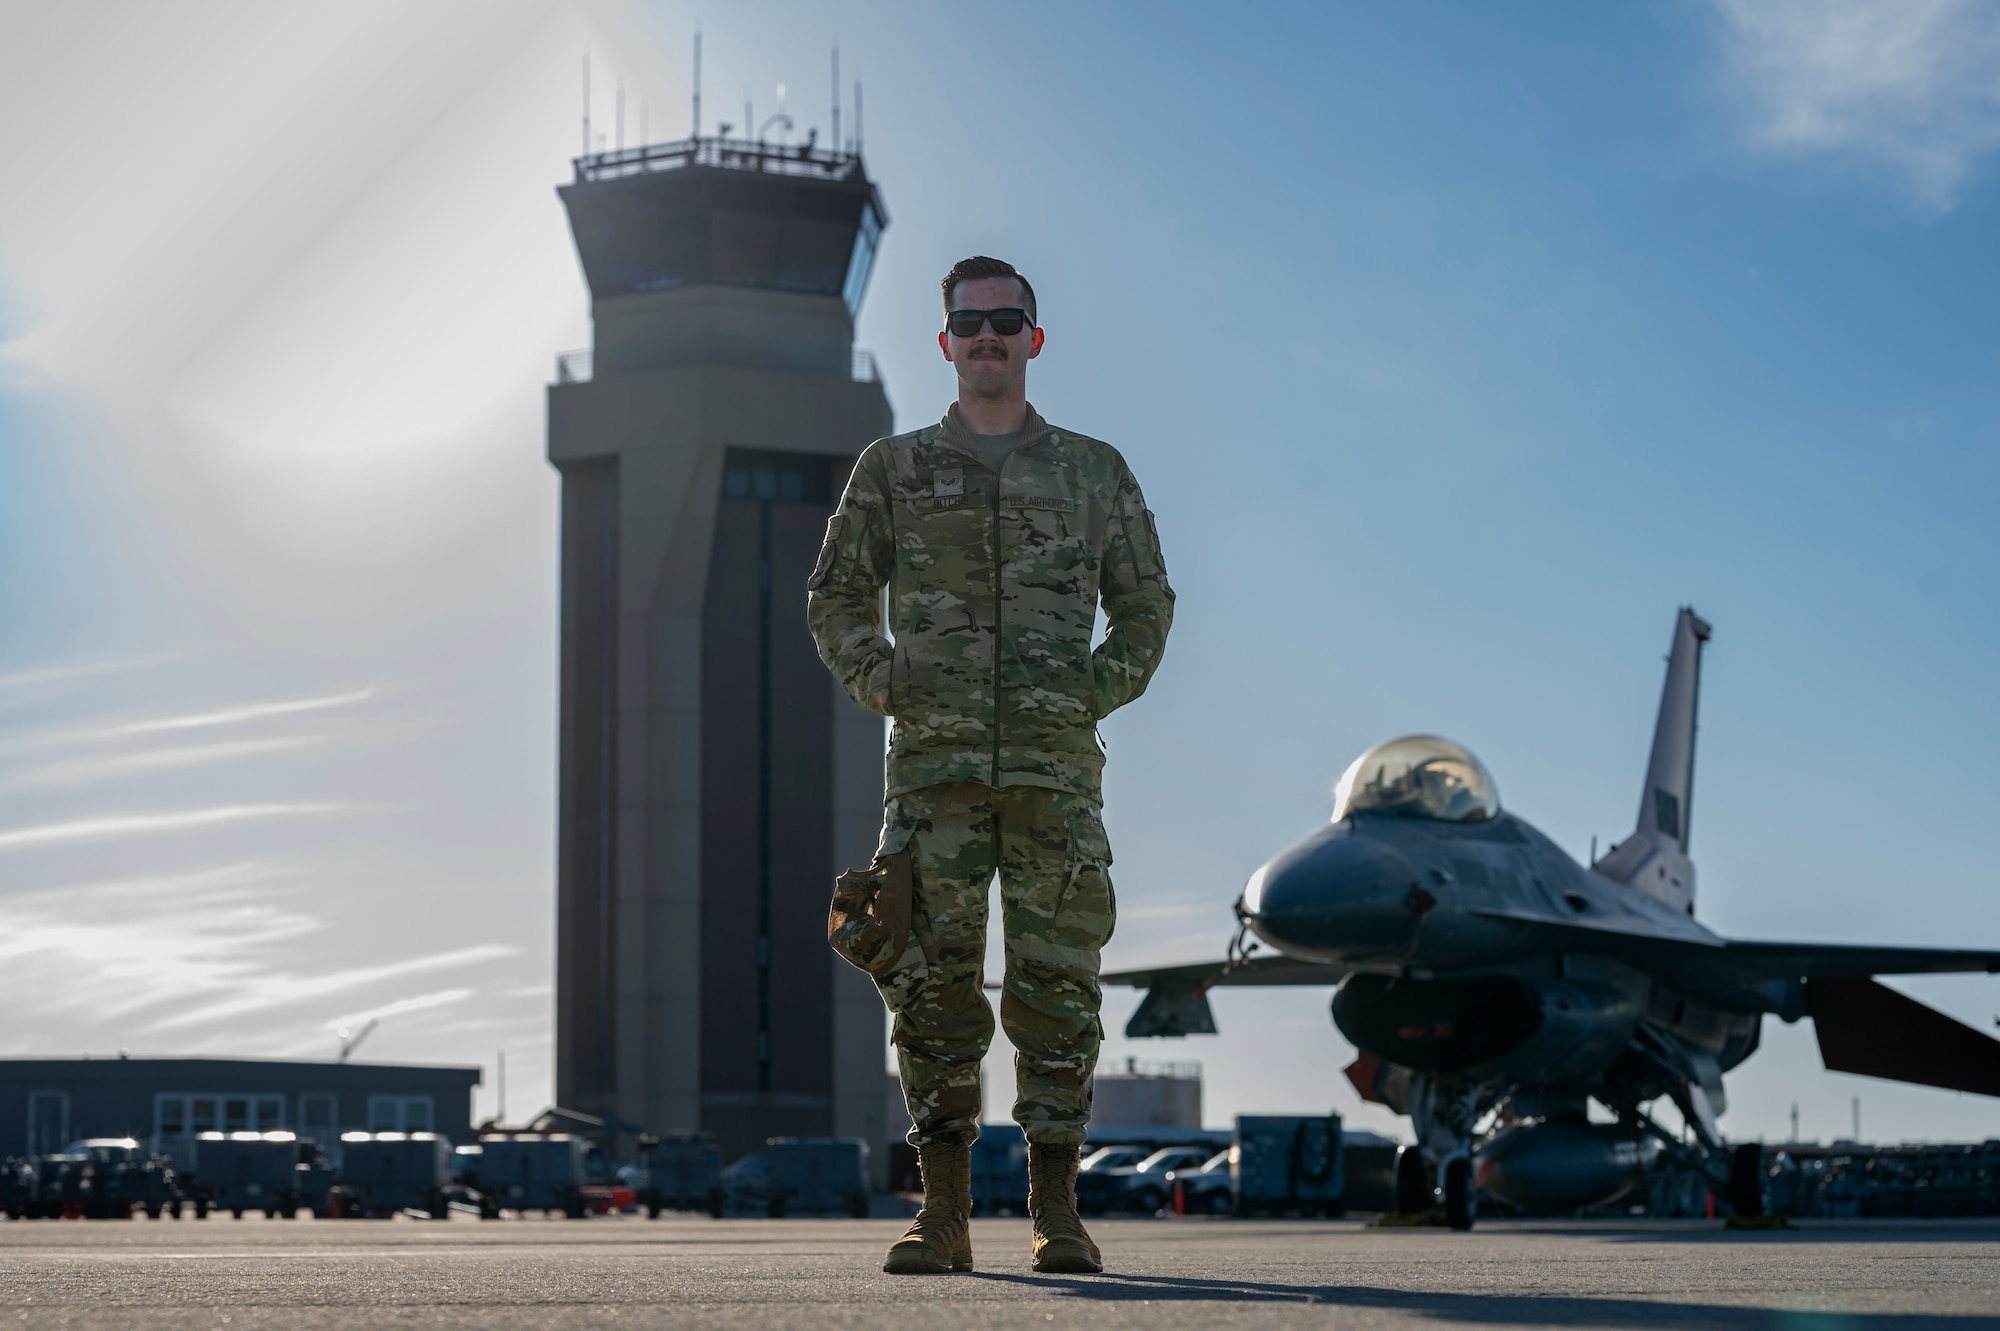 Airman poses in front of an air traffic control tower for a photo